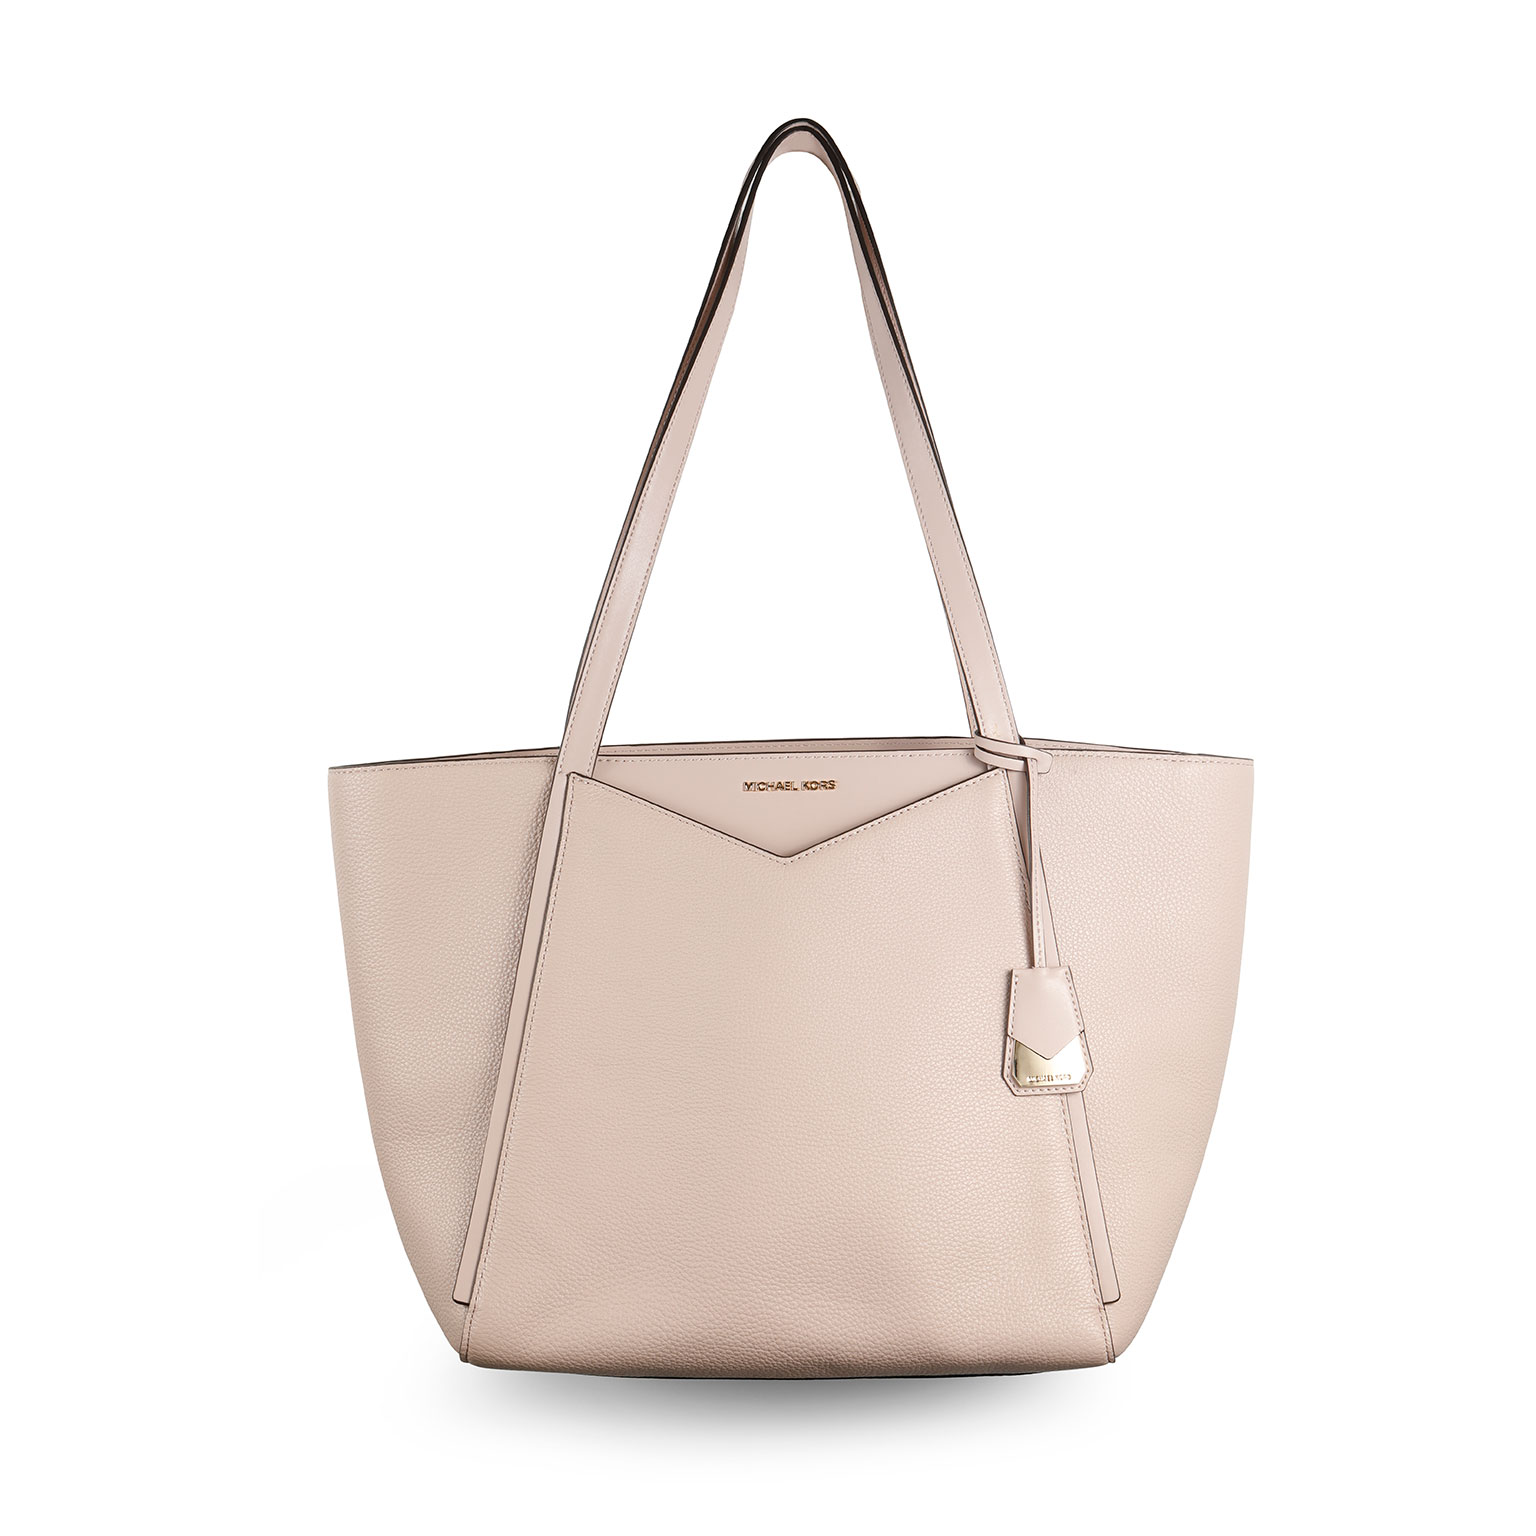 Whitney LG Tote Leather Soft Pink 